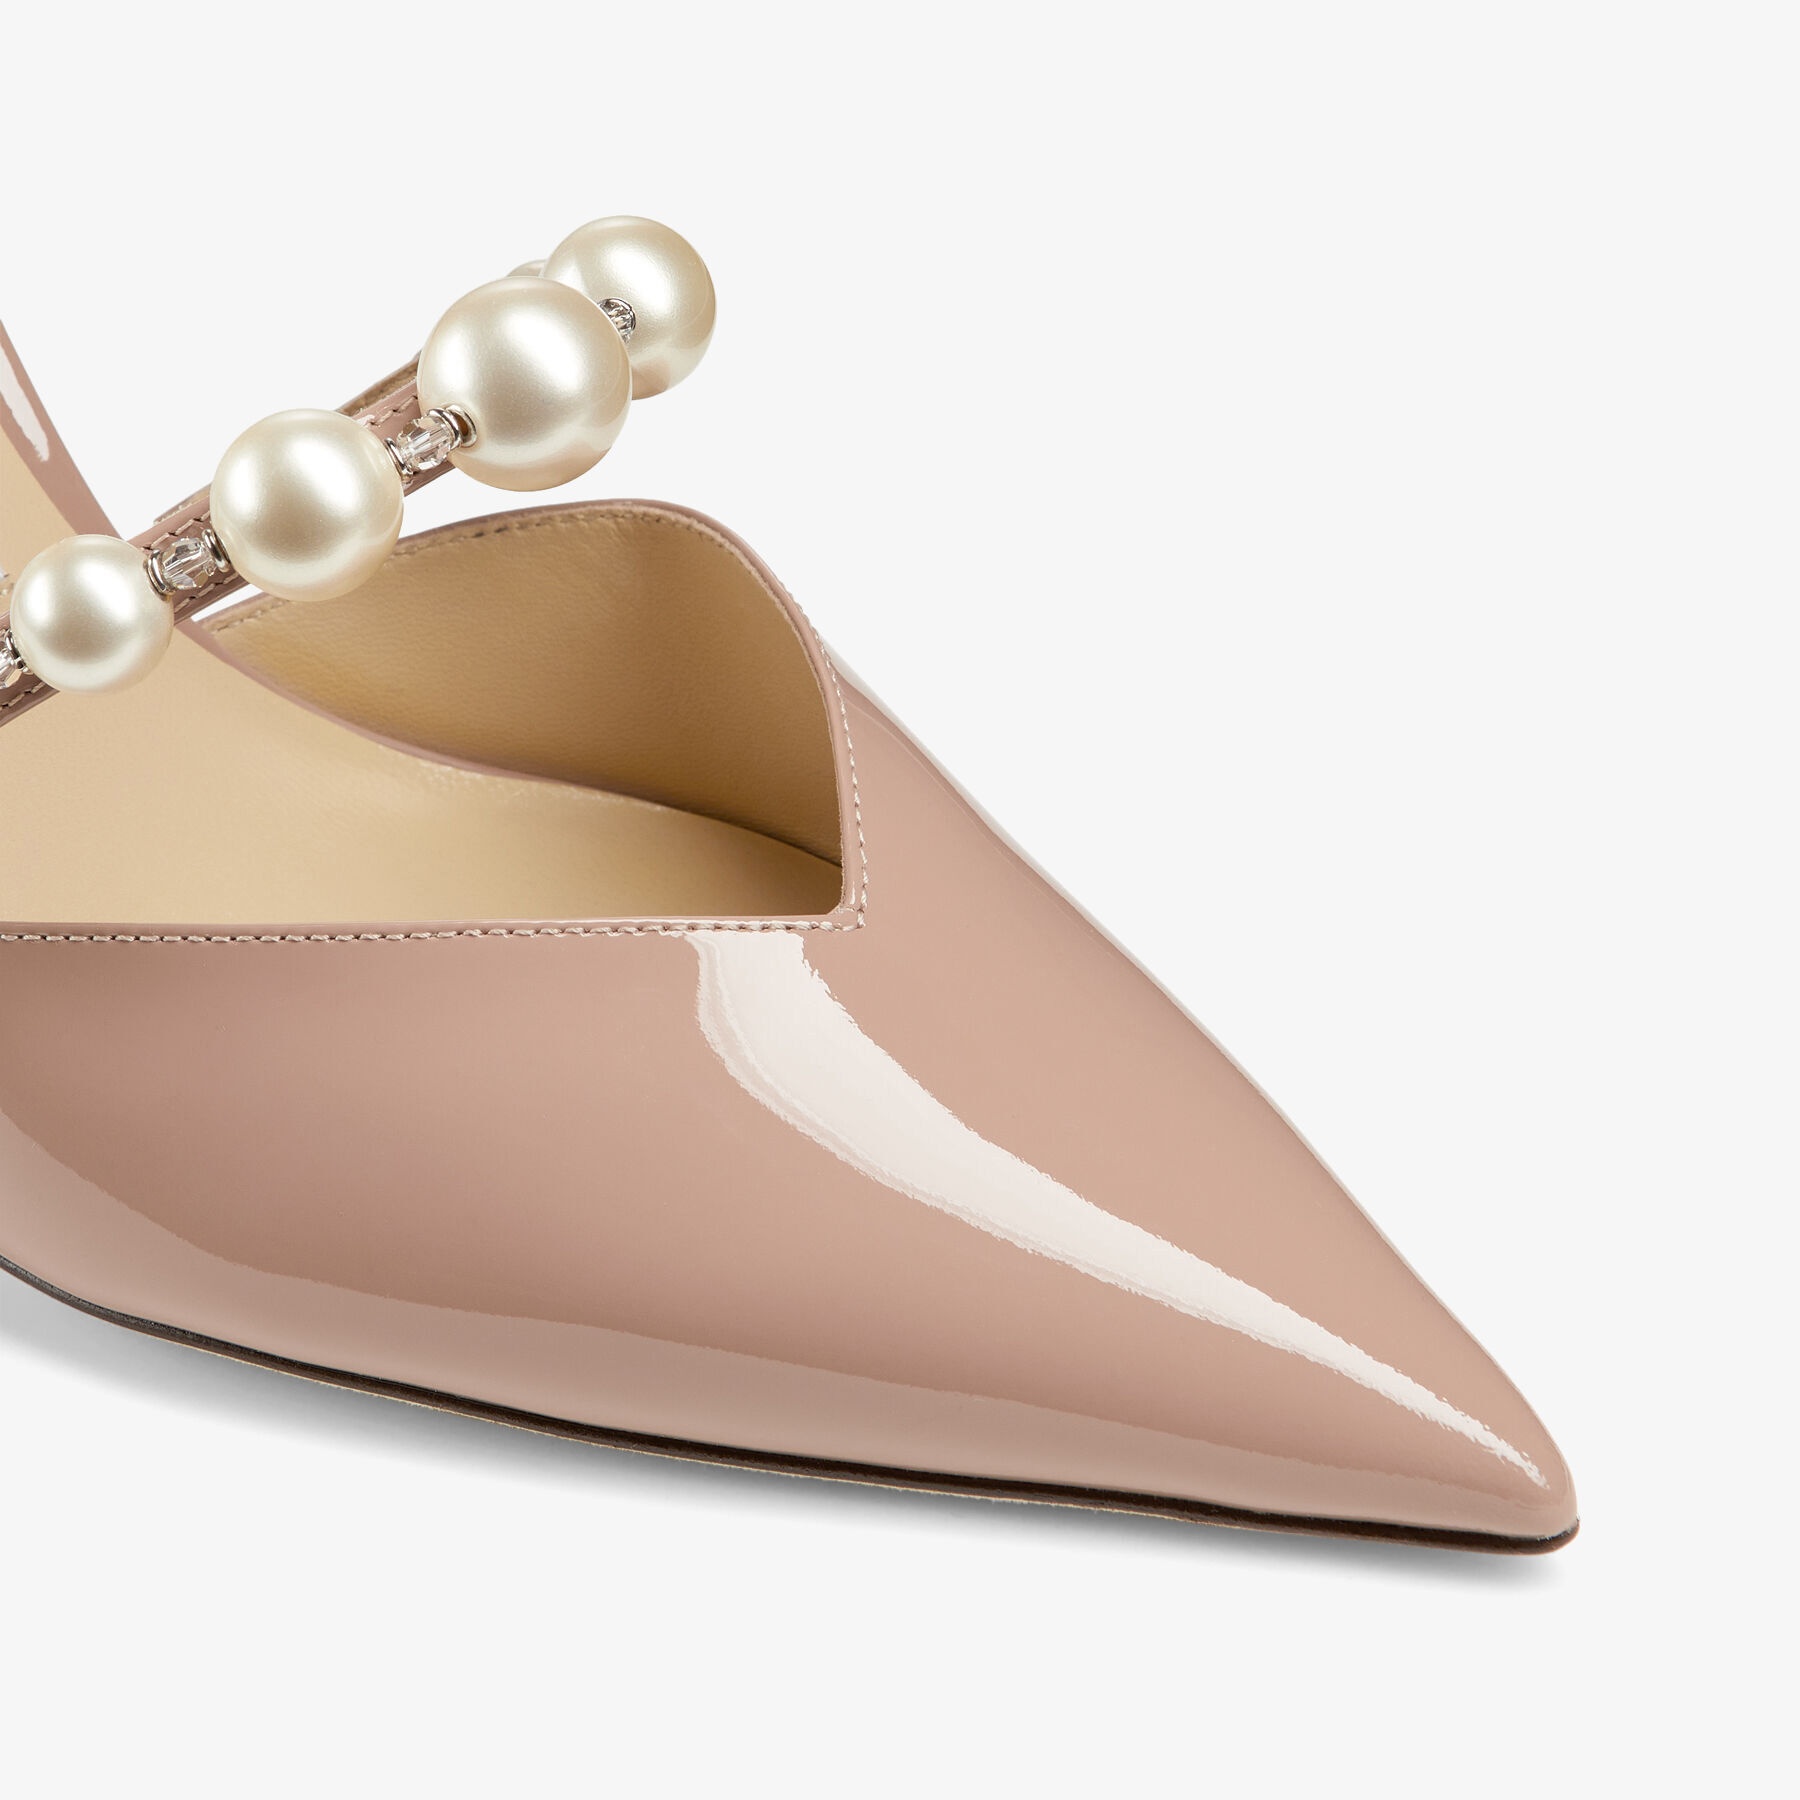 Aurelie 65
Ballet Pink Patent Leather Pointed Pumps with Pearl Embellishment - 4